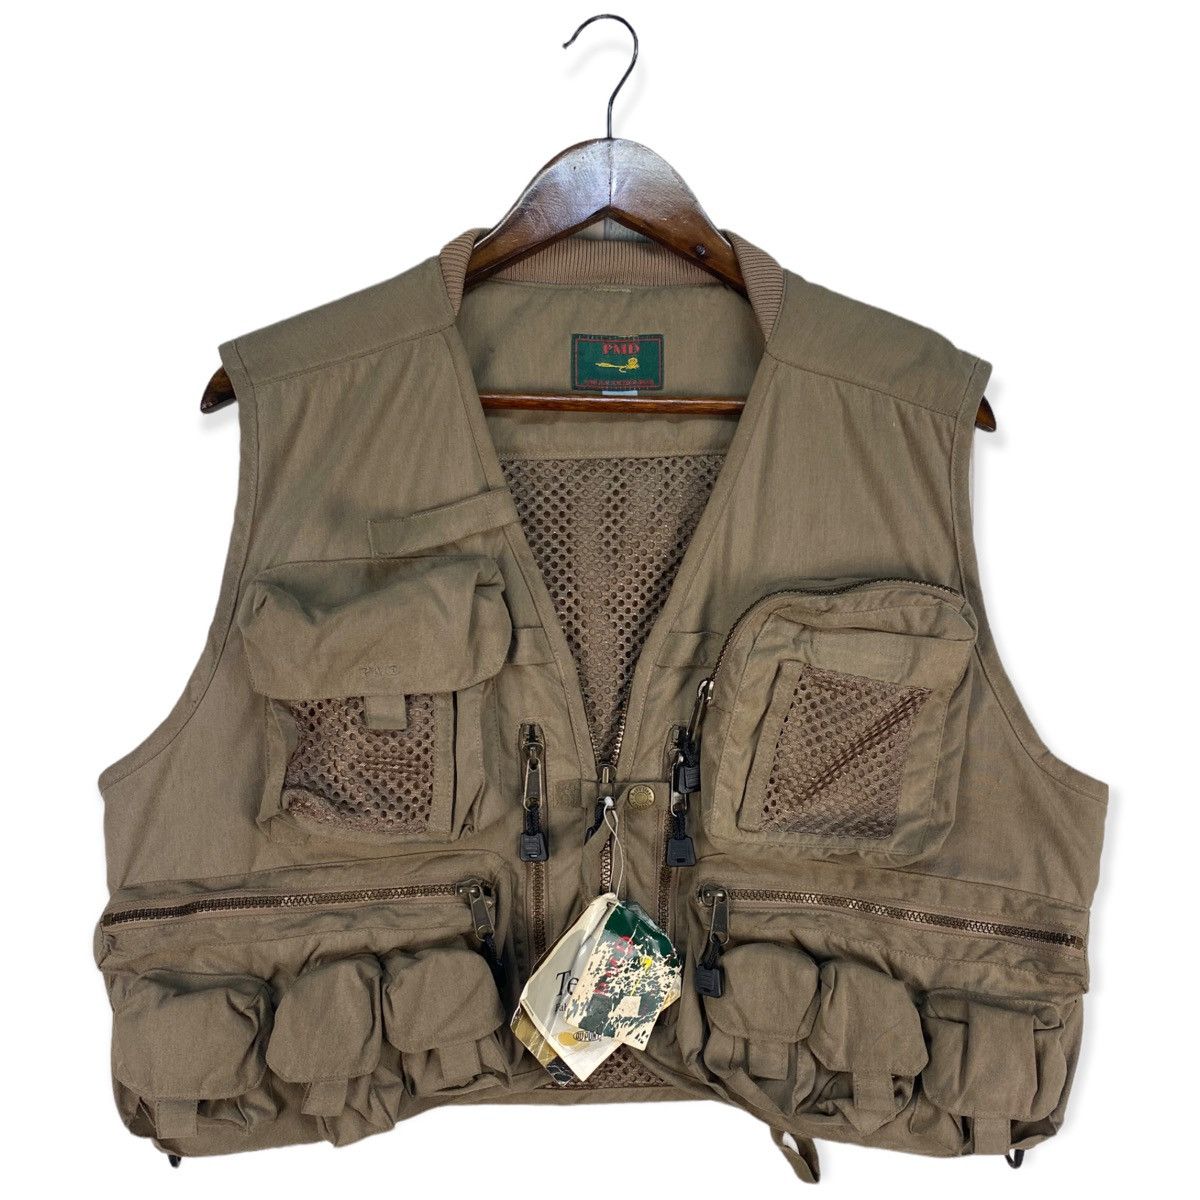 Outdoor Style Go Out! PMD FINE FLY FISHING GEAR VEST